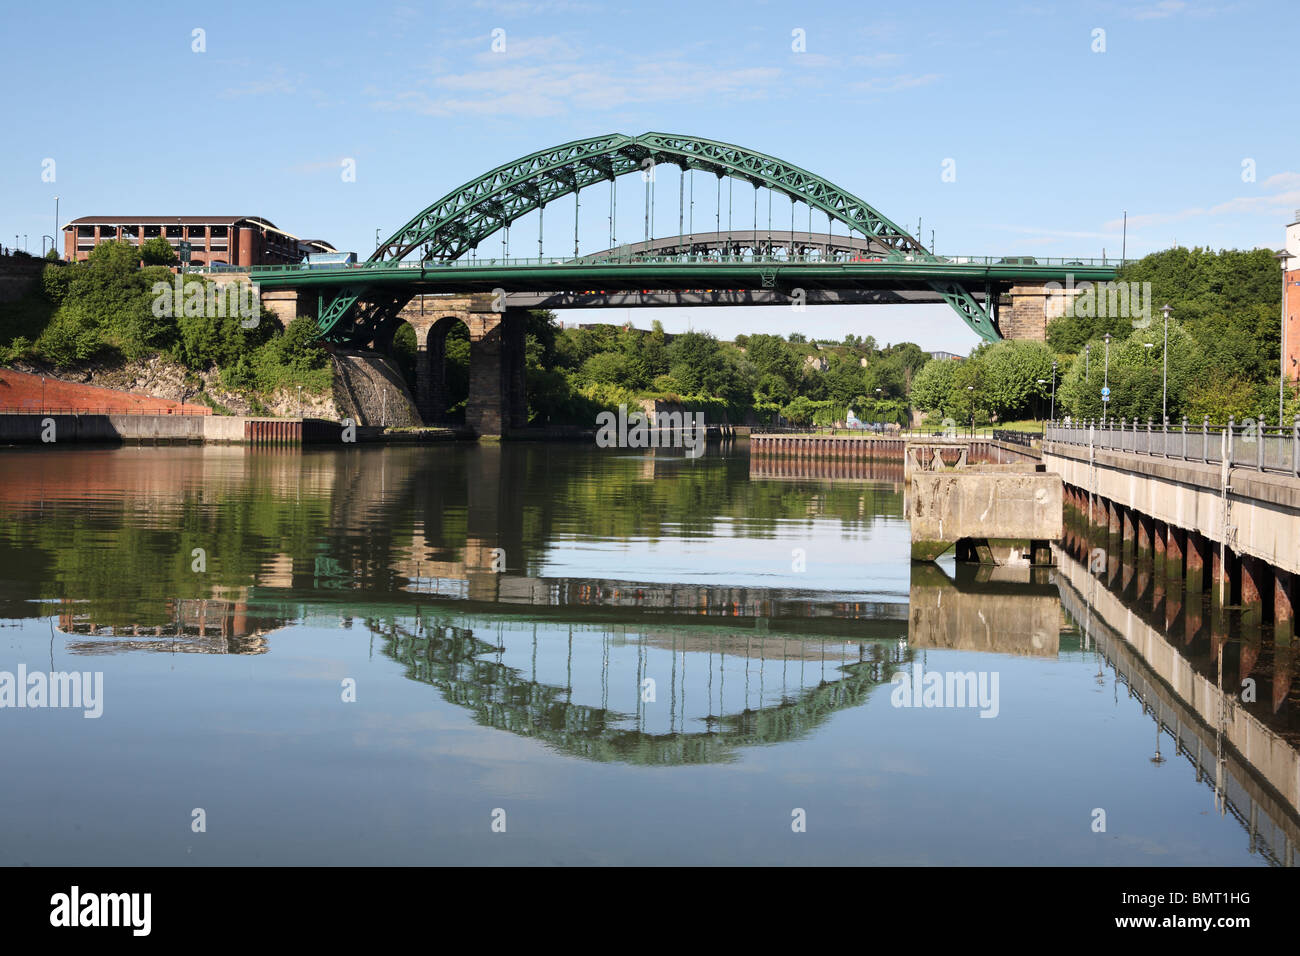 Wearmouth road and railway bridges over the river Wear seen from the north east. Sunderland, England. Stock Photo